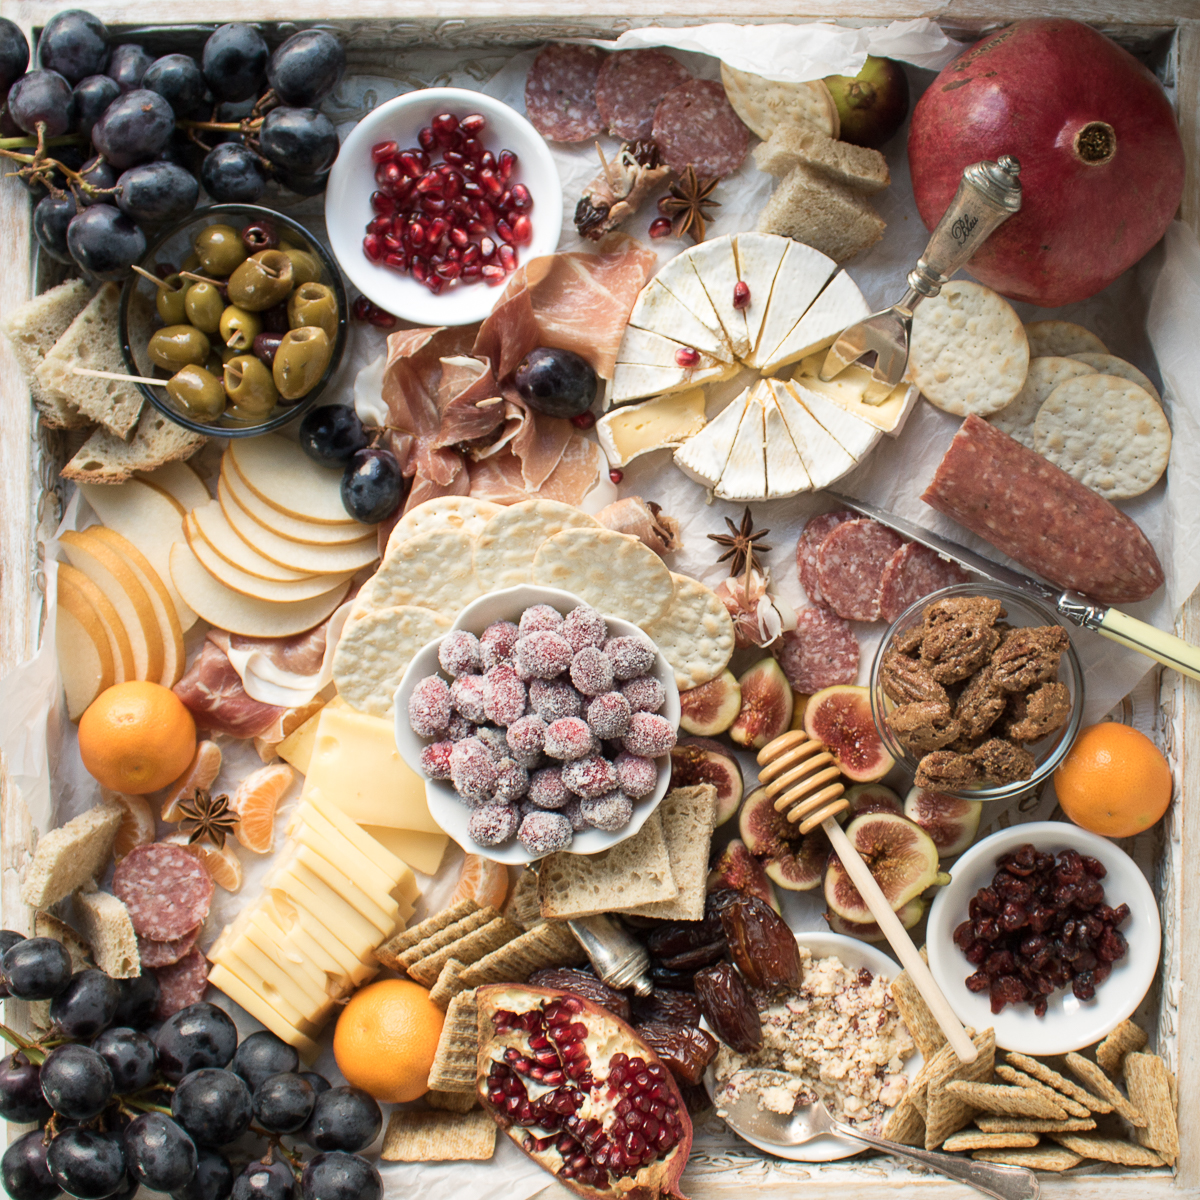 Learn how to make an Epic Charcuterie Board for impressive yet easy entertaining. This Winter Charcuterie Board is filled with meats, cheeses, veggies, nuts, olives, dried fruits, crackers, and more. An easy appetizer perfect for happy hour entertaining.